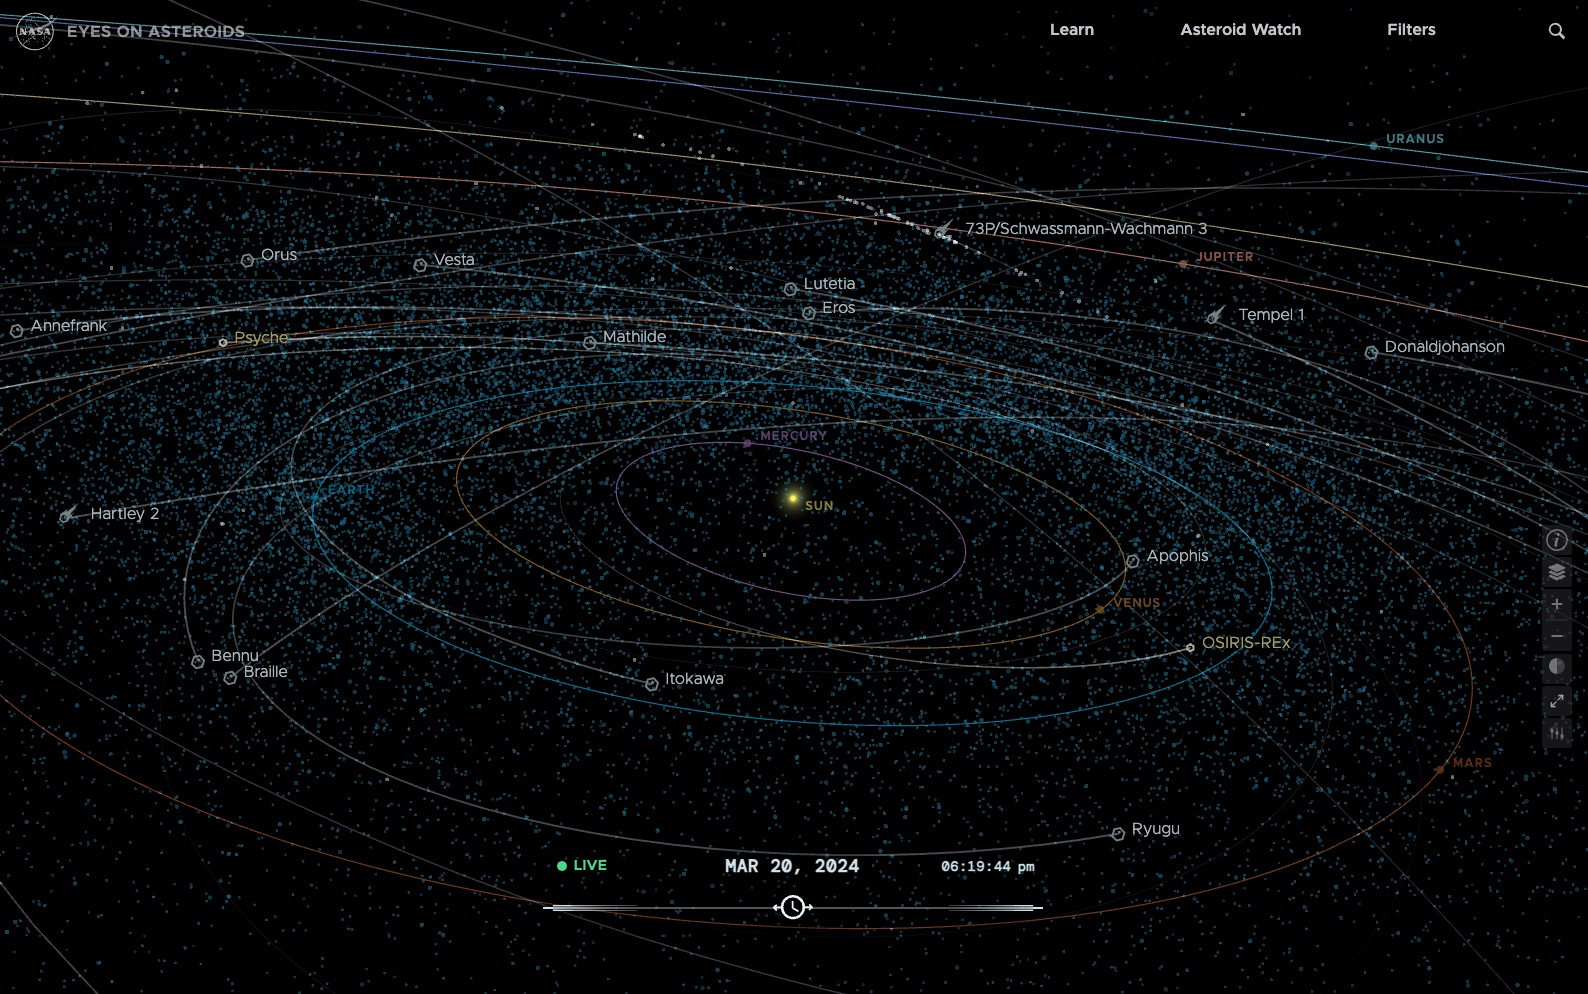 Thousands of blue dots representing asteroids speckle this simulated view of the solar system with colored orbit lines for each planet and notations for various asteroids and missions.